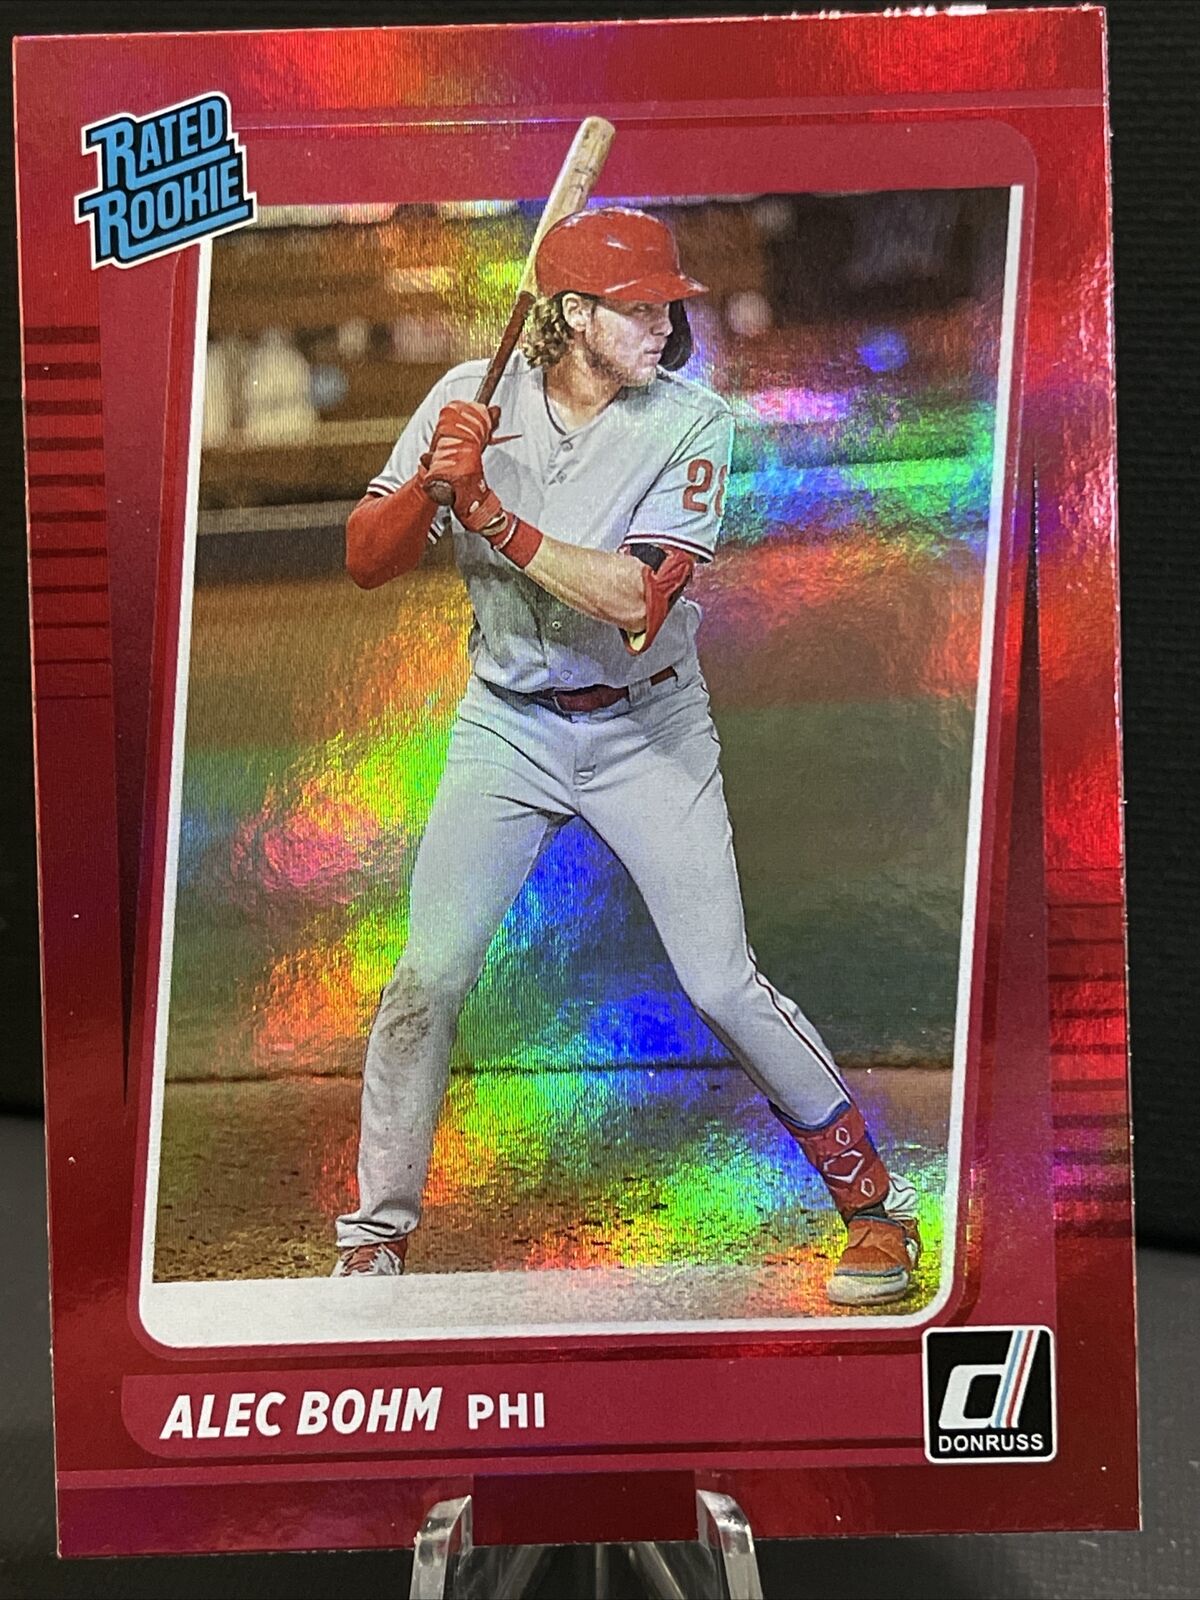 2021 Donruss Baseball ALEC BOHM RC Rated Rookie Red Holo Foil # 35 Phillies